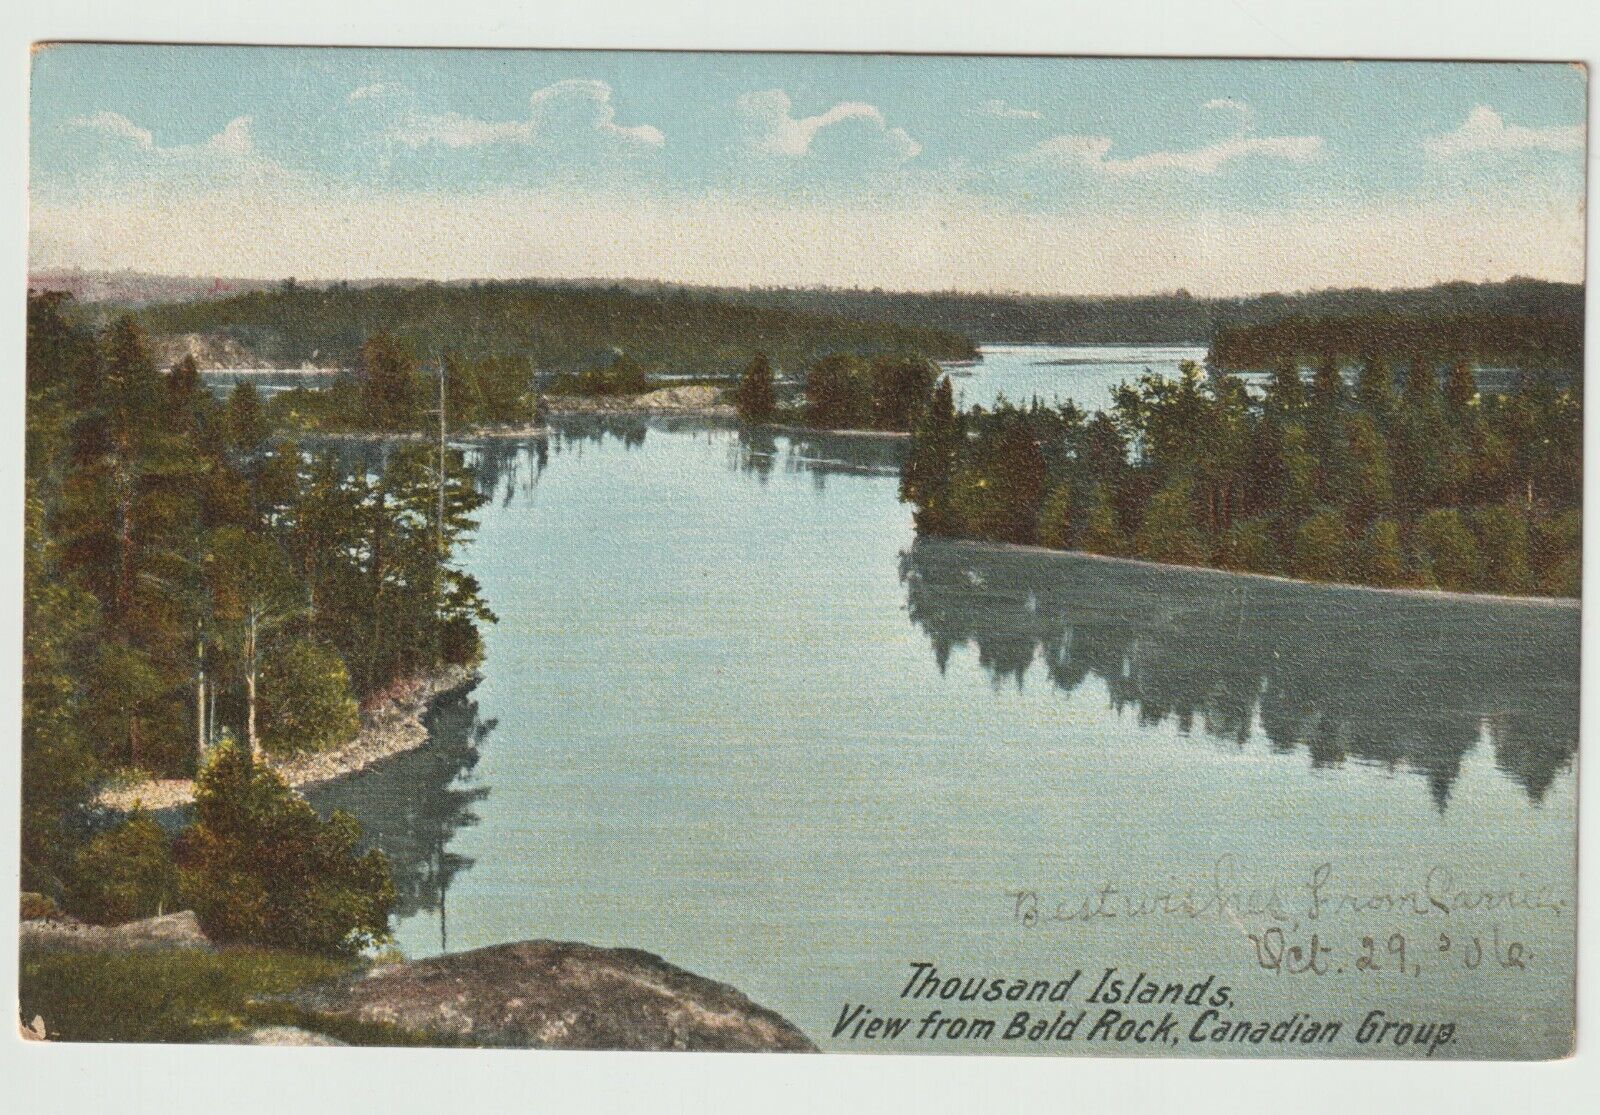 Used Postcard View from Bald Rock Canadian Group Thousand Islands New York NY